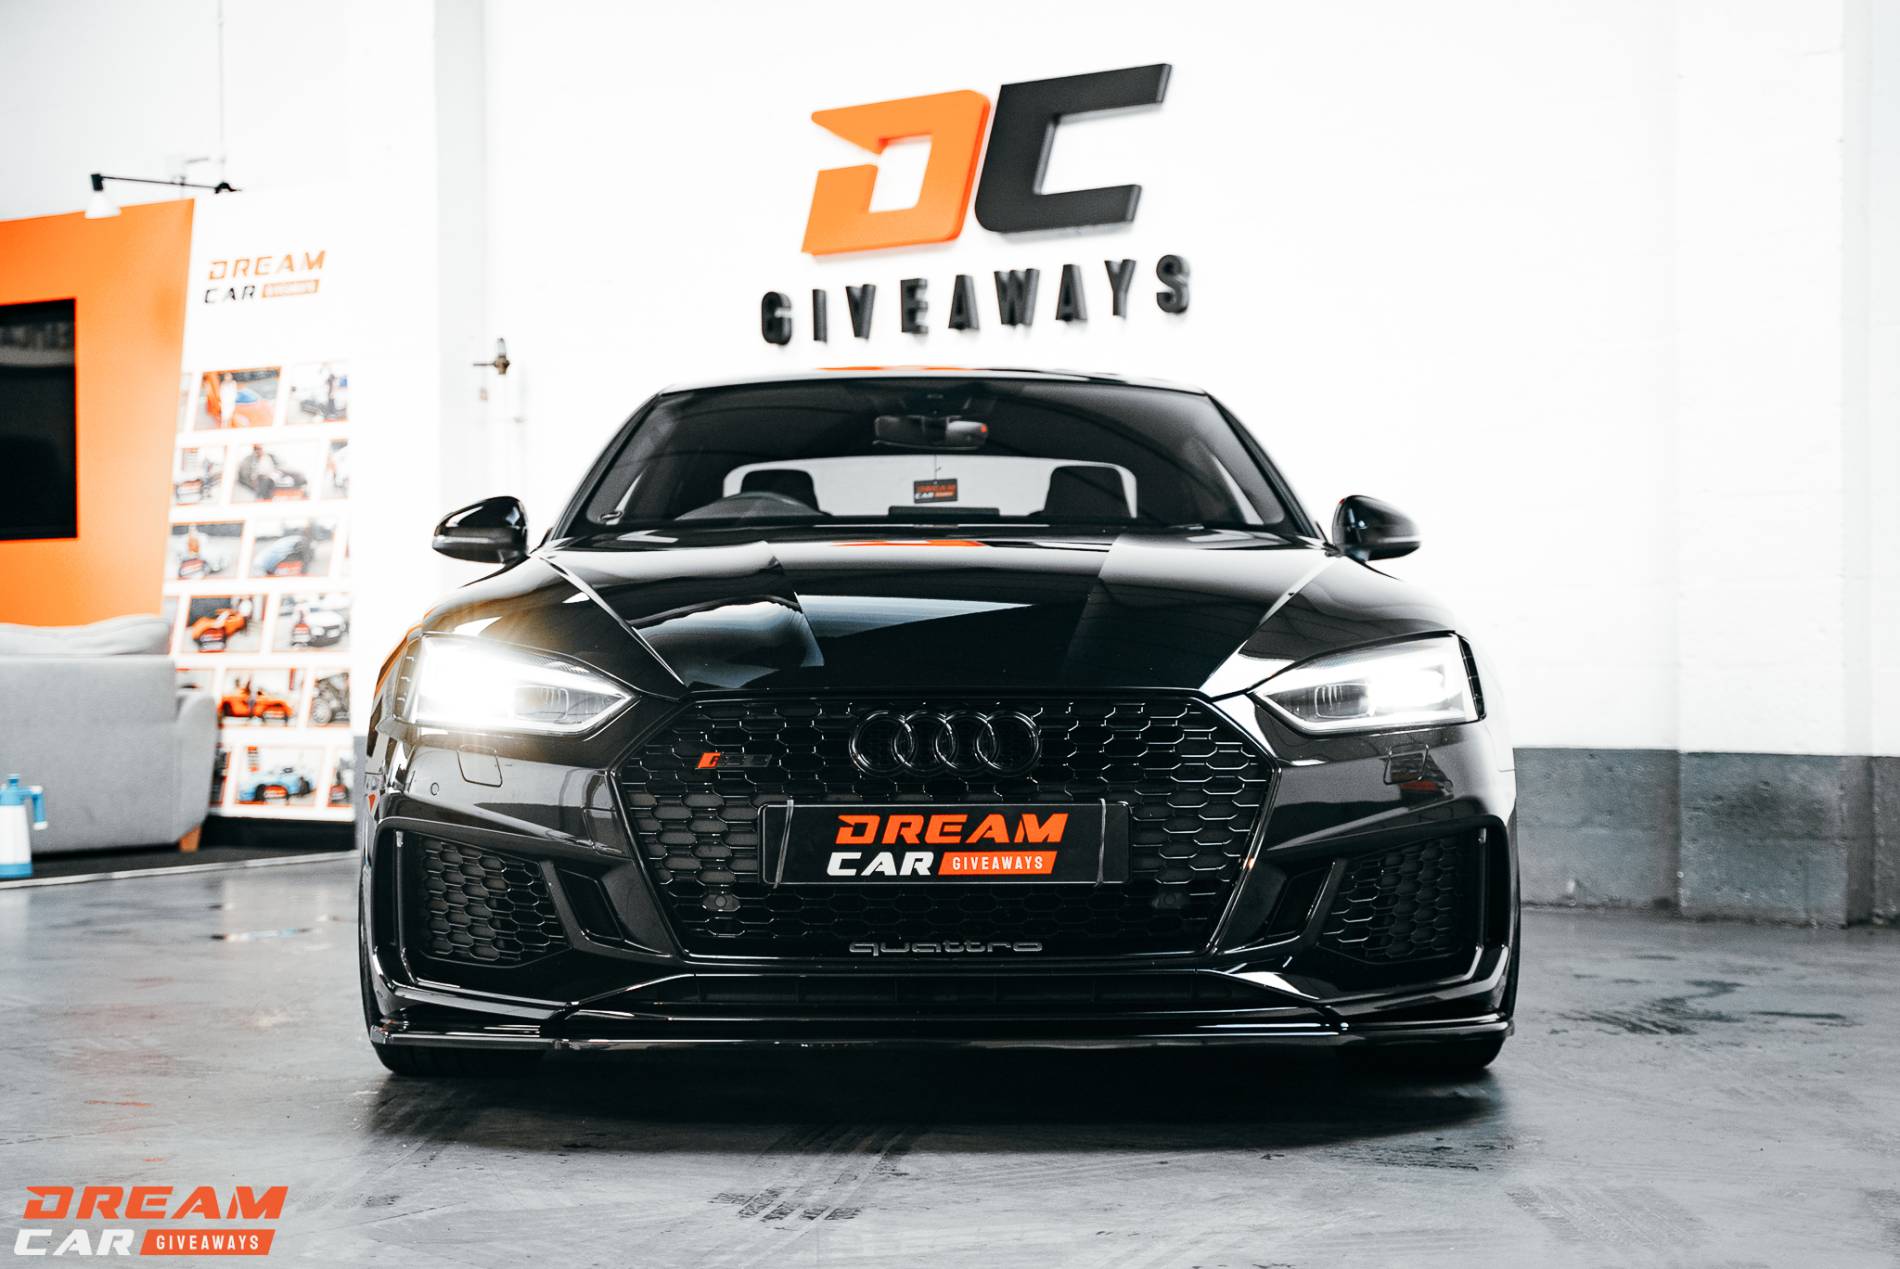 2019 Audi RS5 Sport Edition & £1000 or £39,000 Tax Free